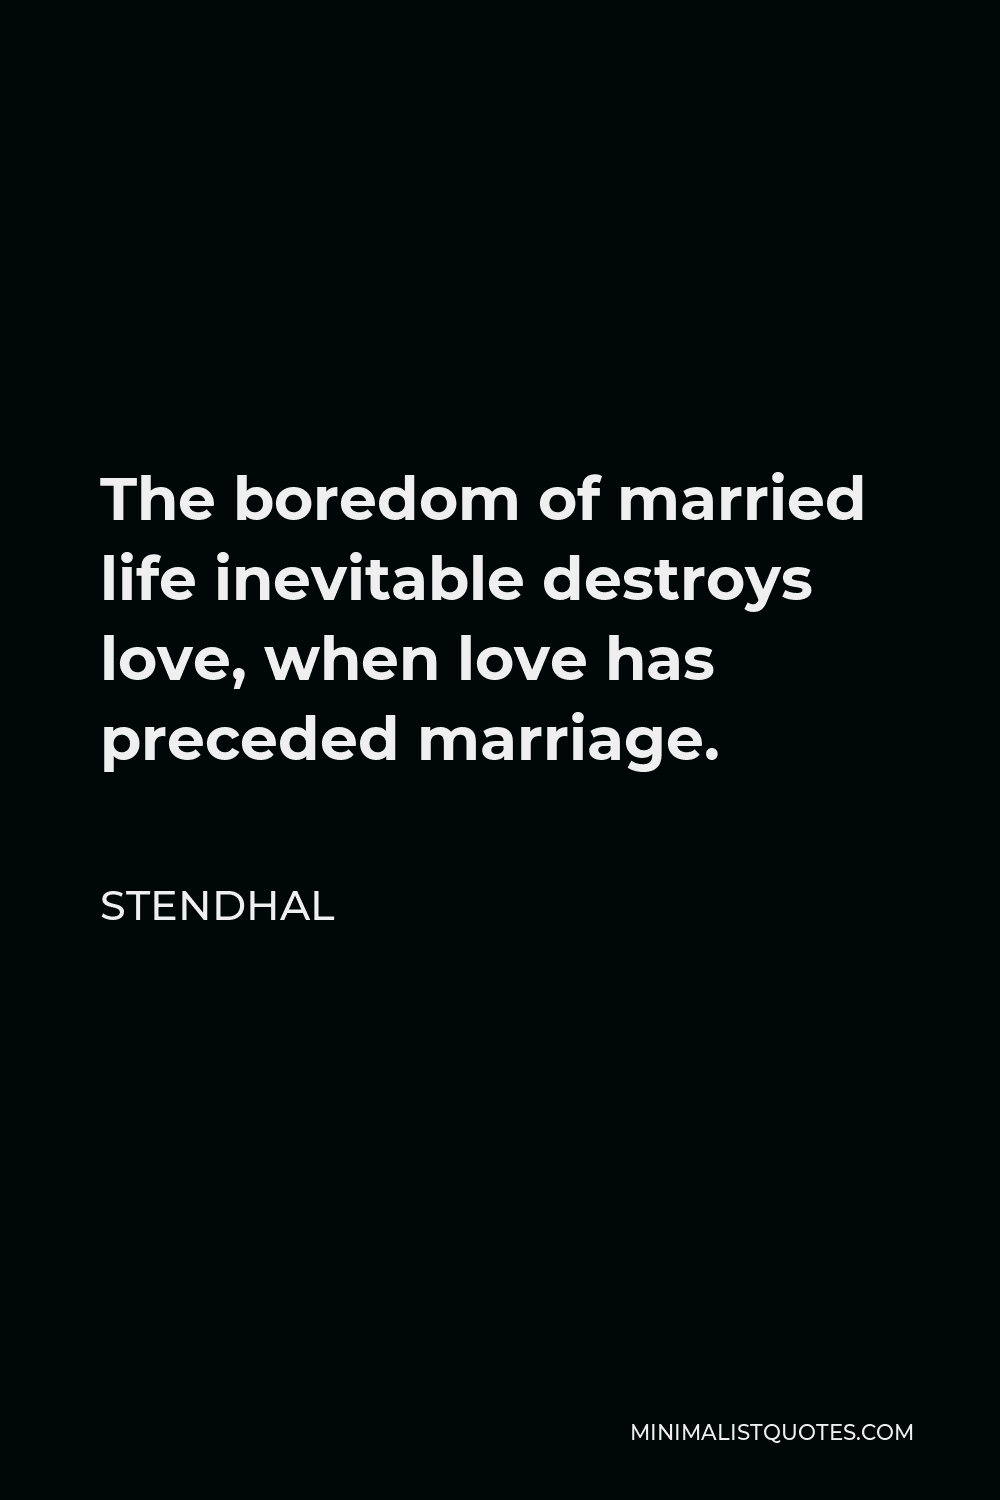 Stendhal Quote - The boredom of married life inevitable destroys love, when love has preceded marriage.